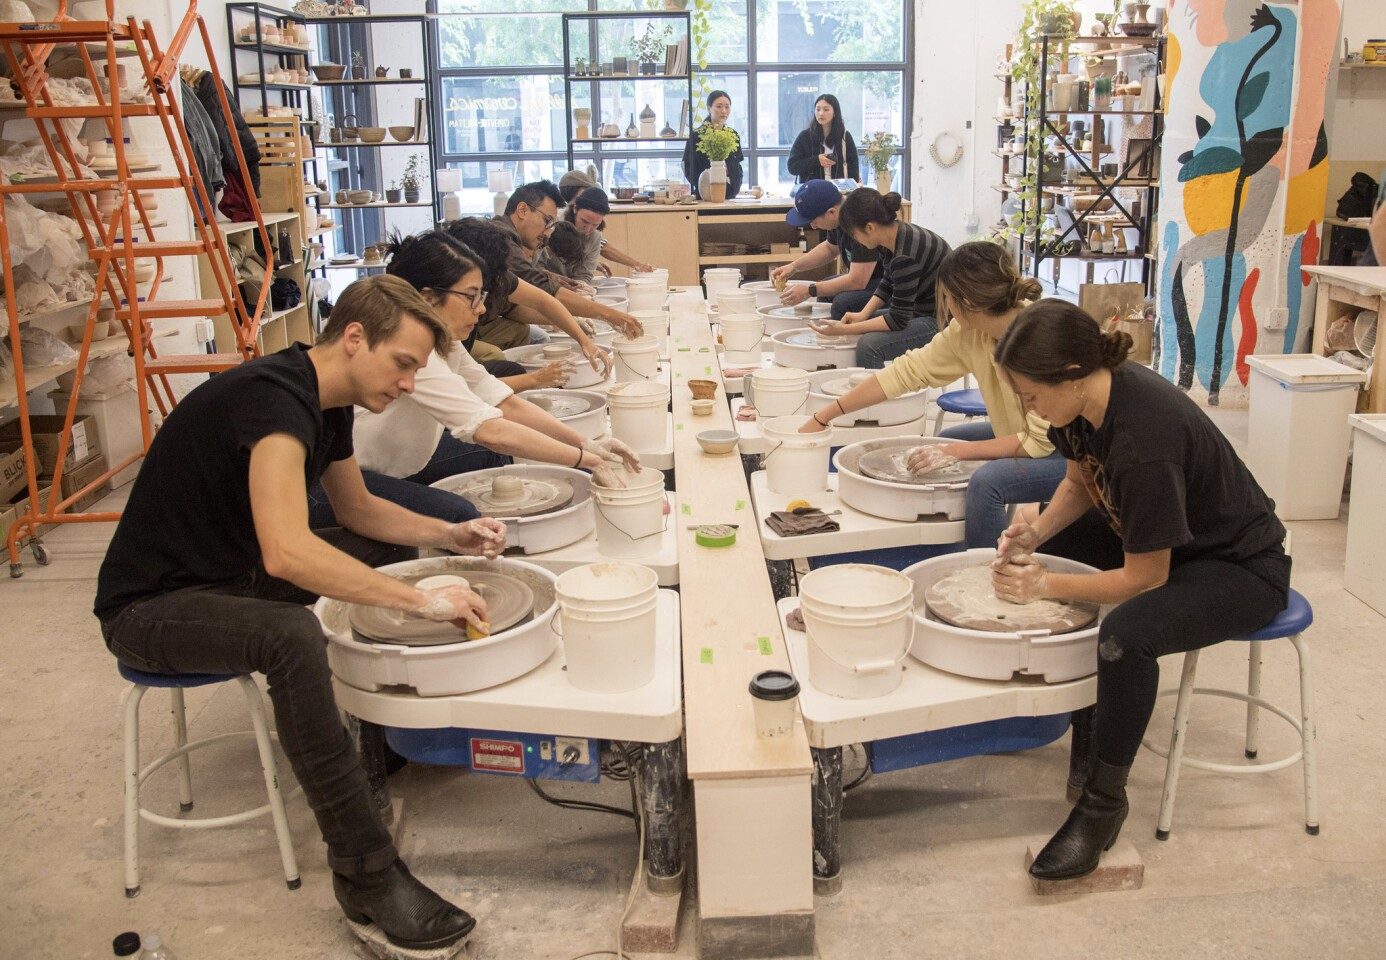 Still Life Ceramics at Row DTLA offers ceramics classes as well as finished products.